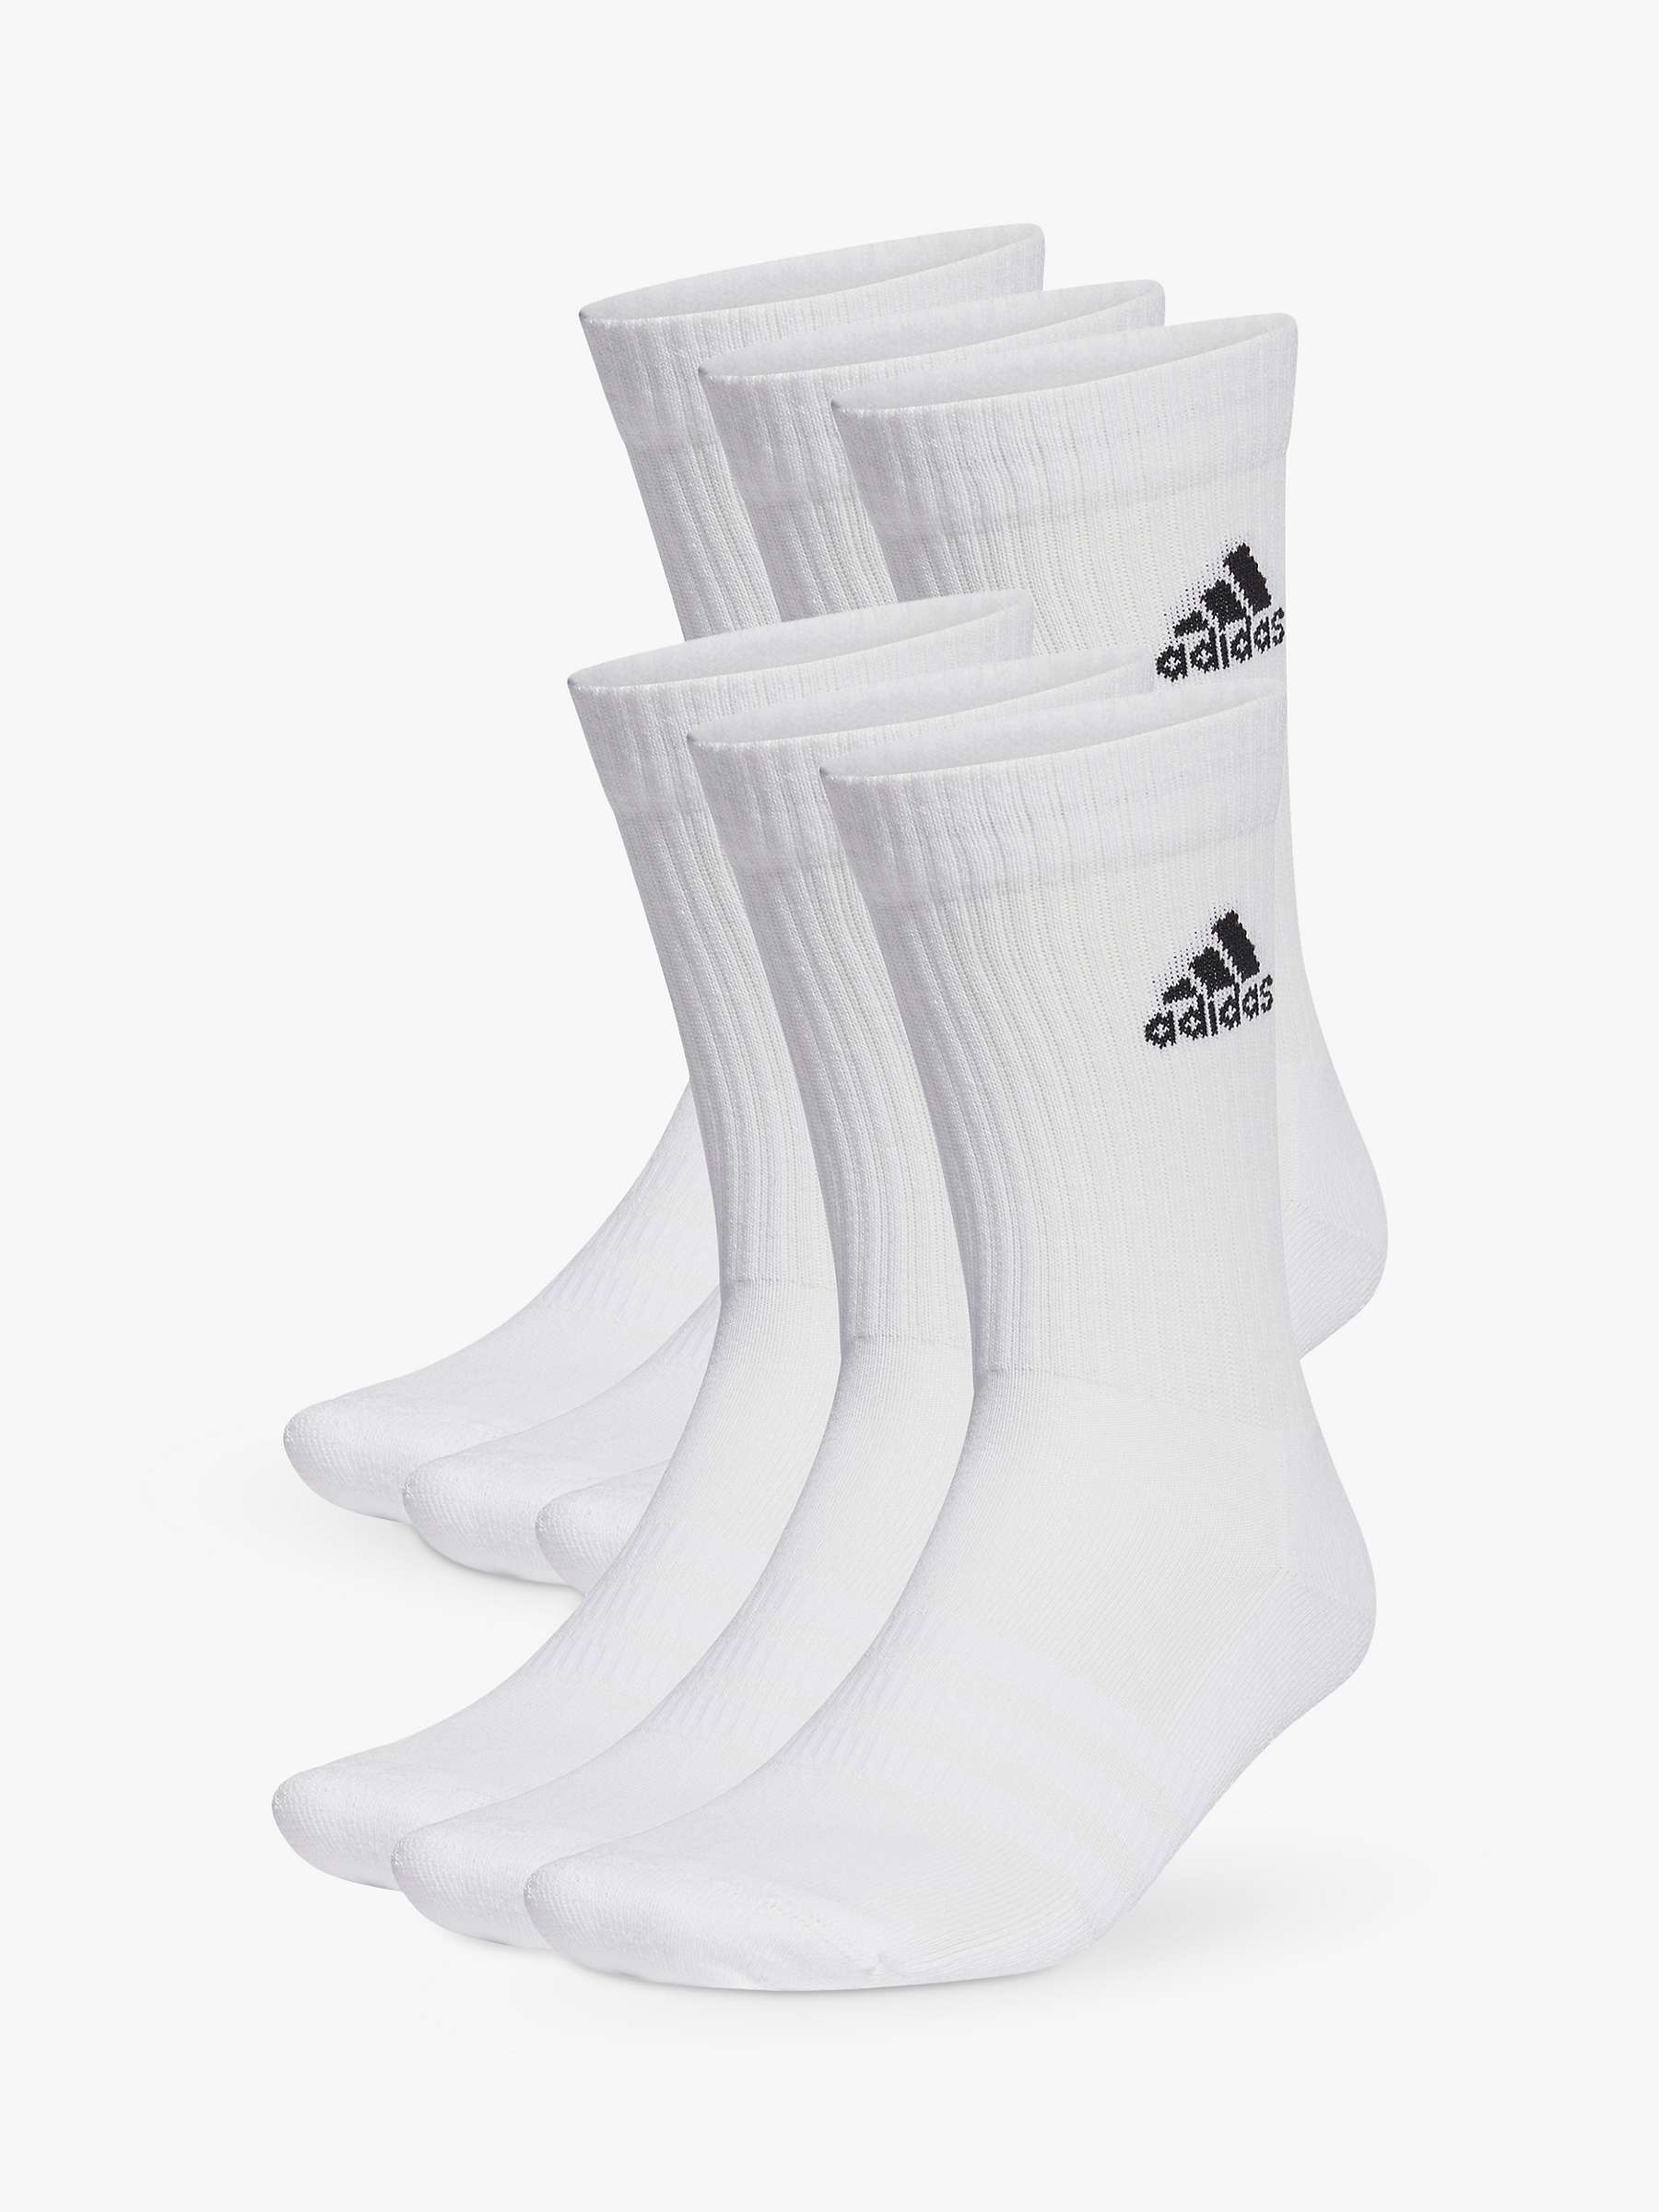 Buy adidas Cushioned Crew Socks, Pack of 6, White/Black Online at johnlewis.com